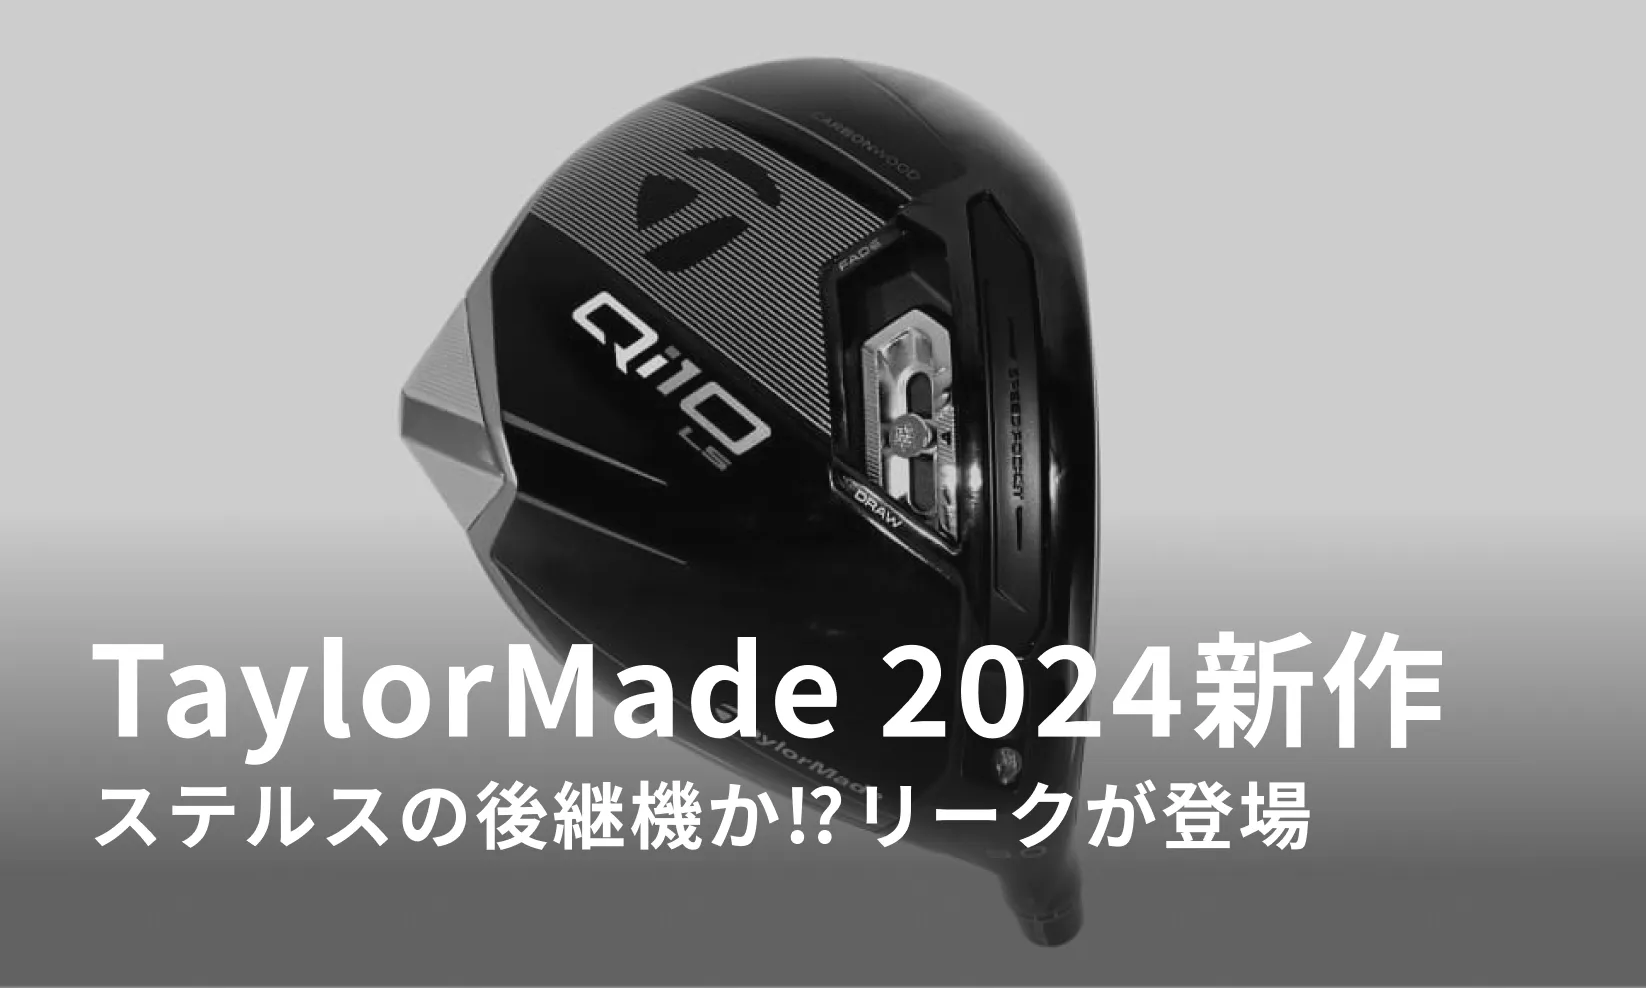 Taylormade 2024new